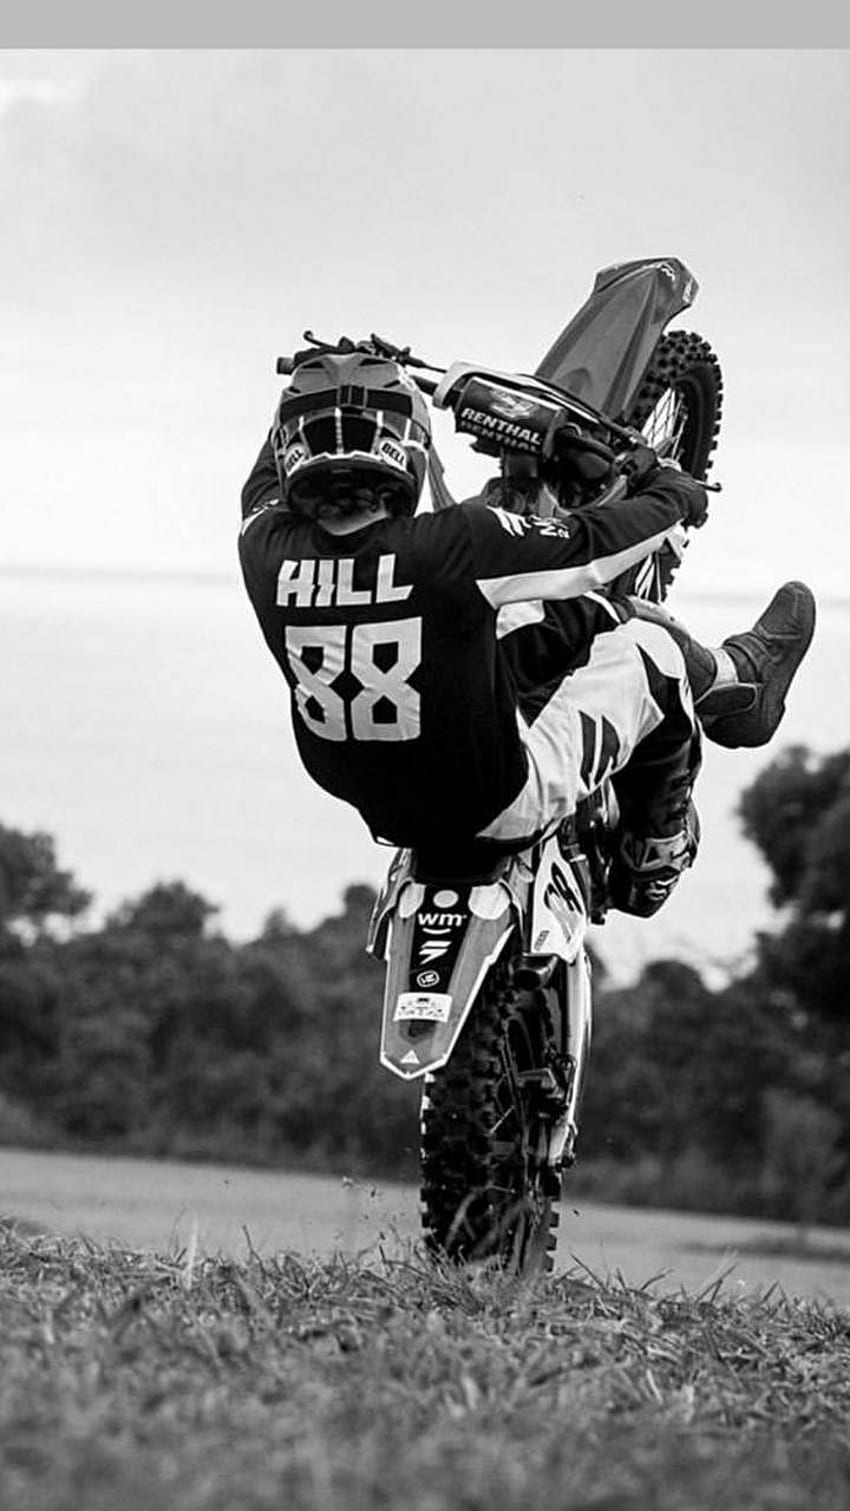 black and white dirt bike backgrounds